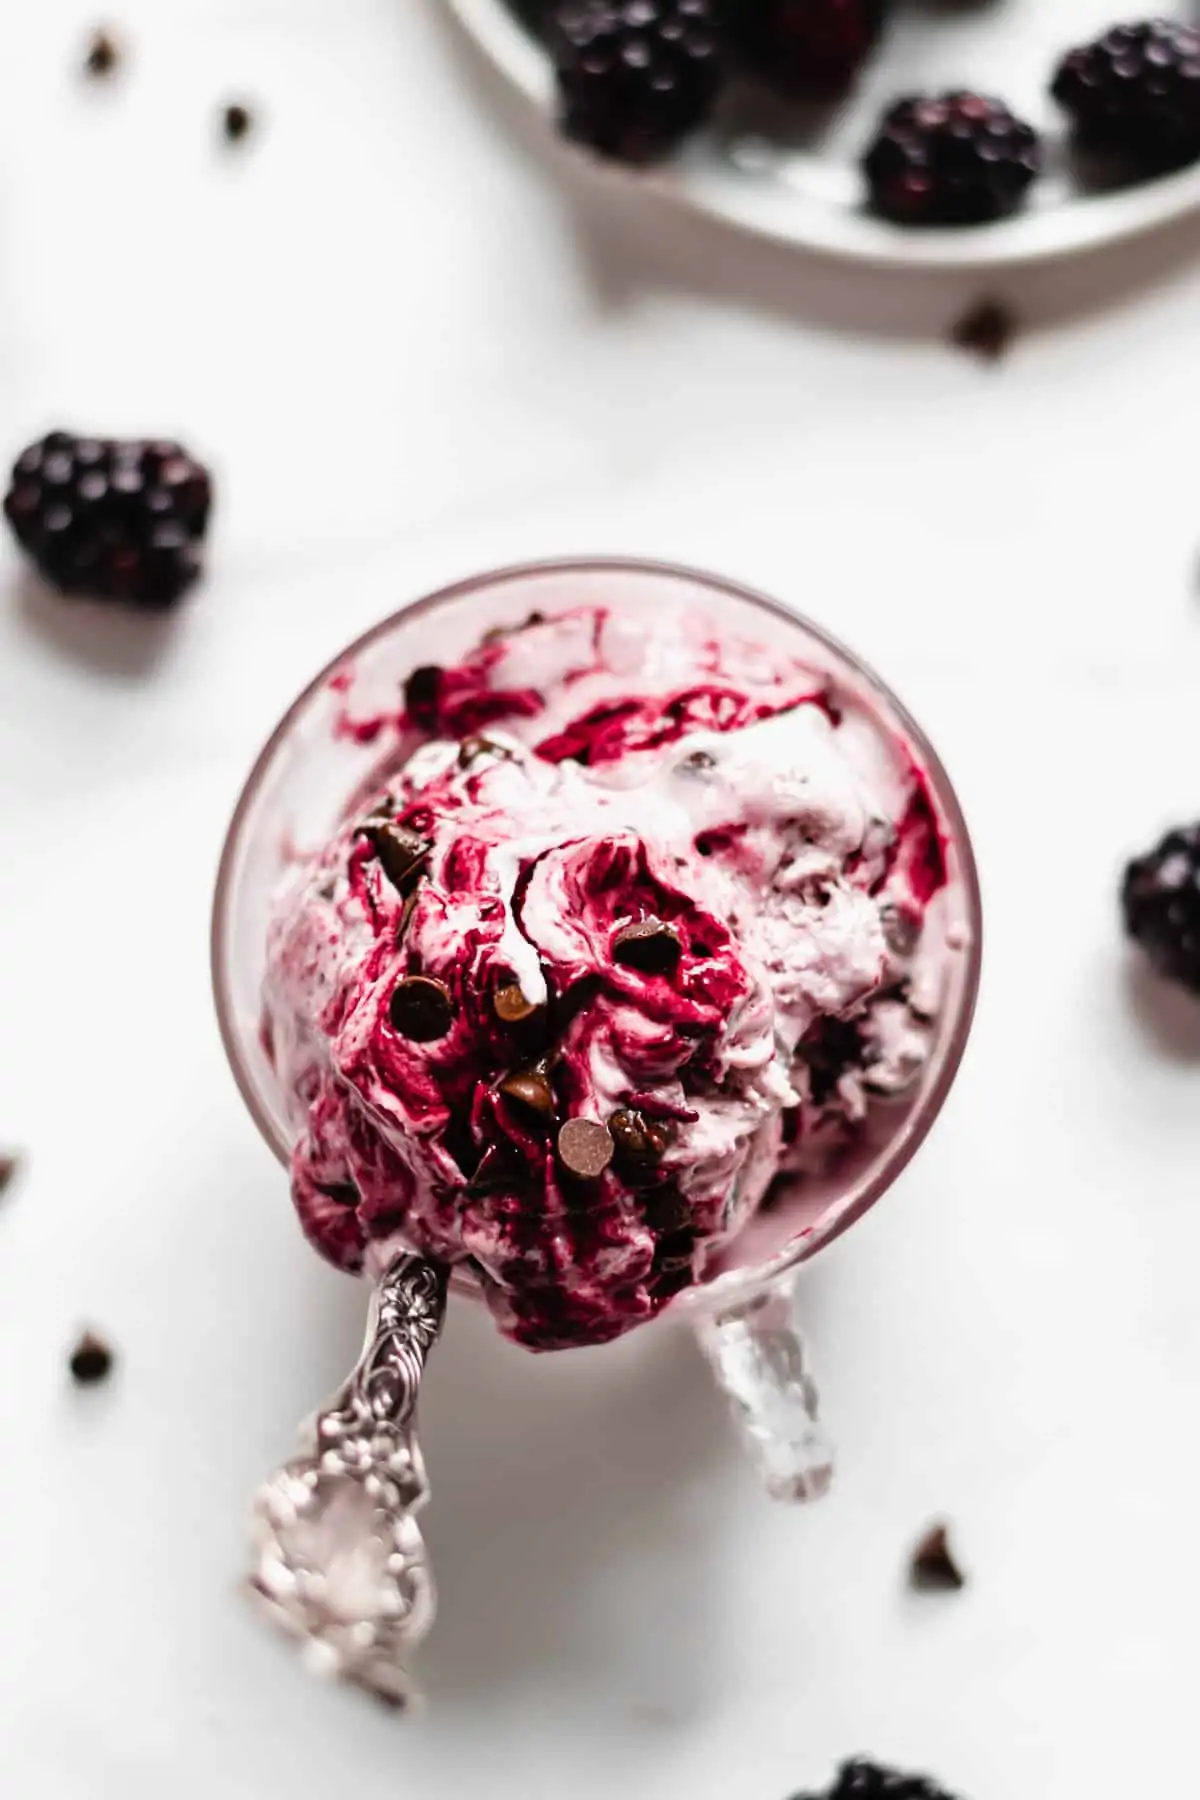 Blackberry ice cream with chocolate chips in a glass.